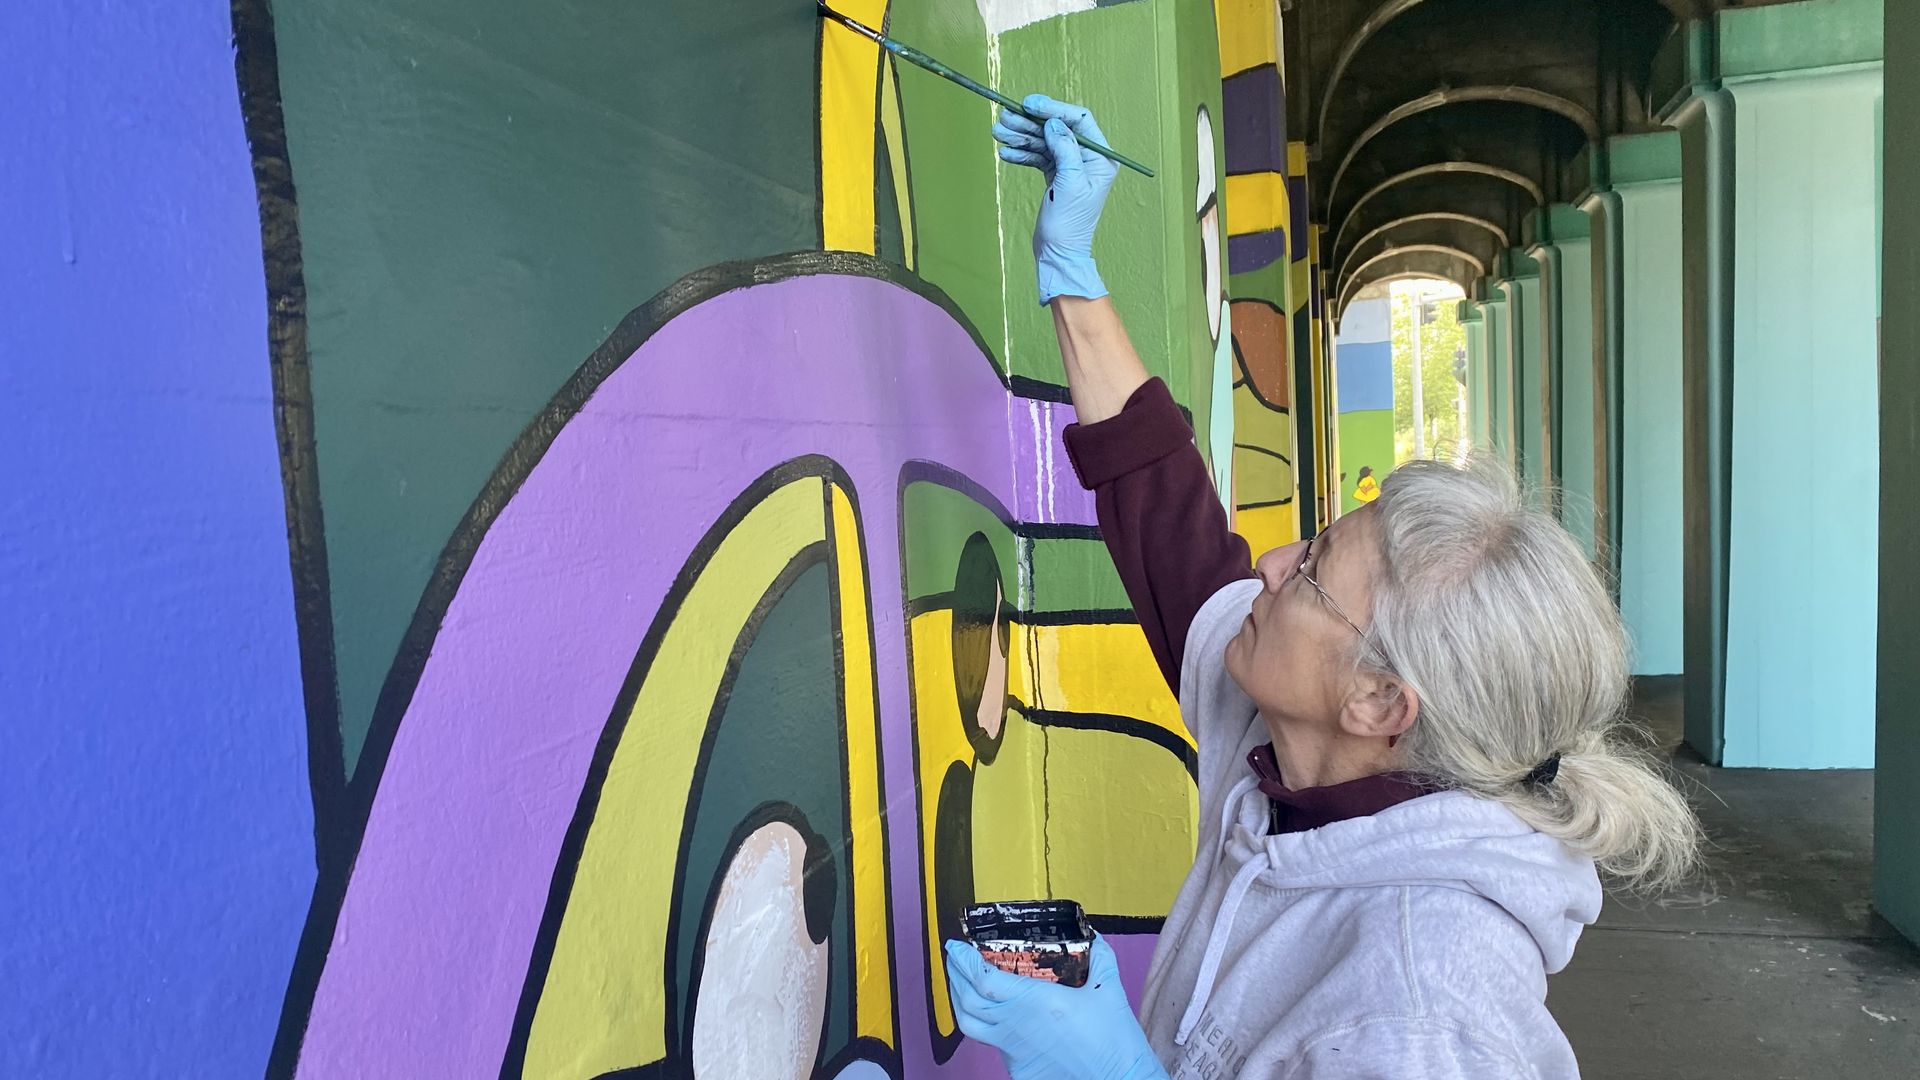 A woman reaches high above her head with a paintbrush to touch up a mural on a cement wall, with columns of an overpass behind her.